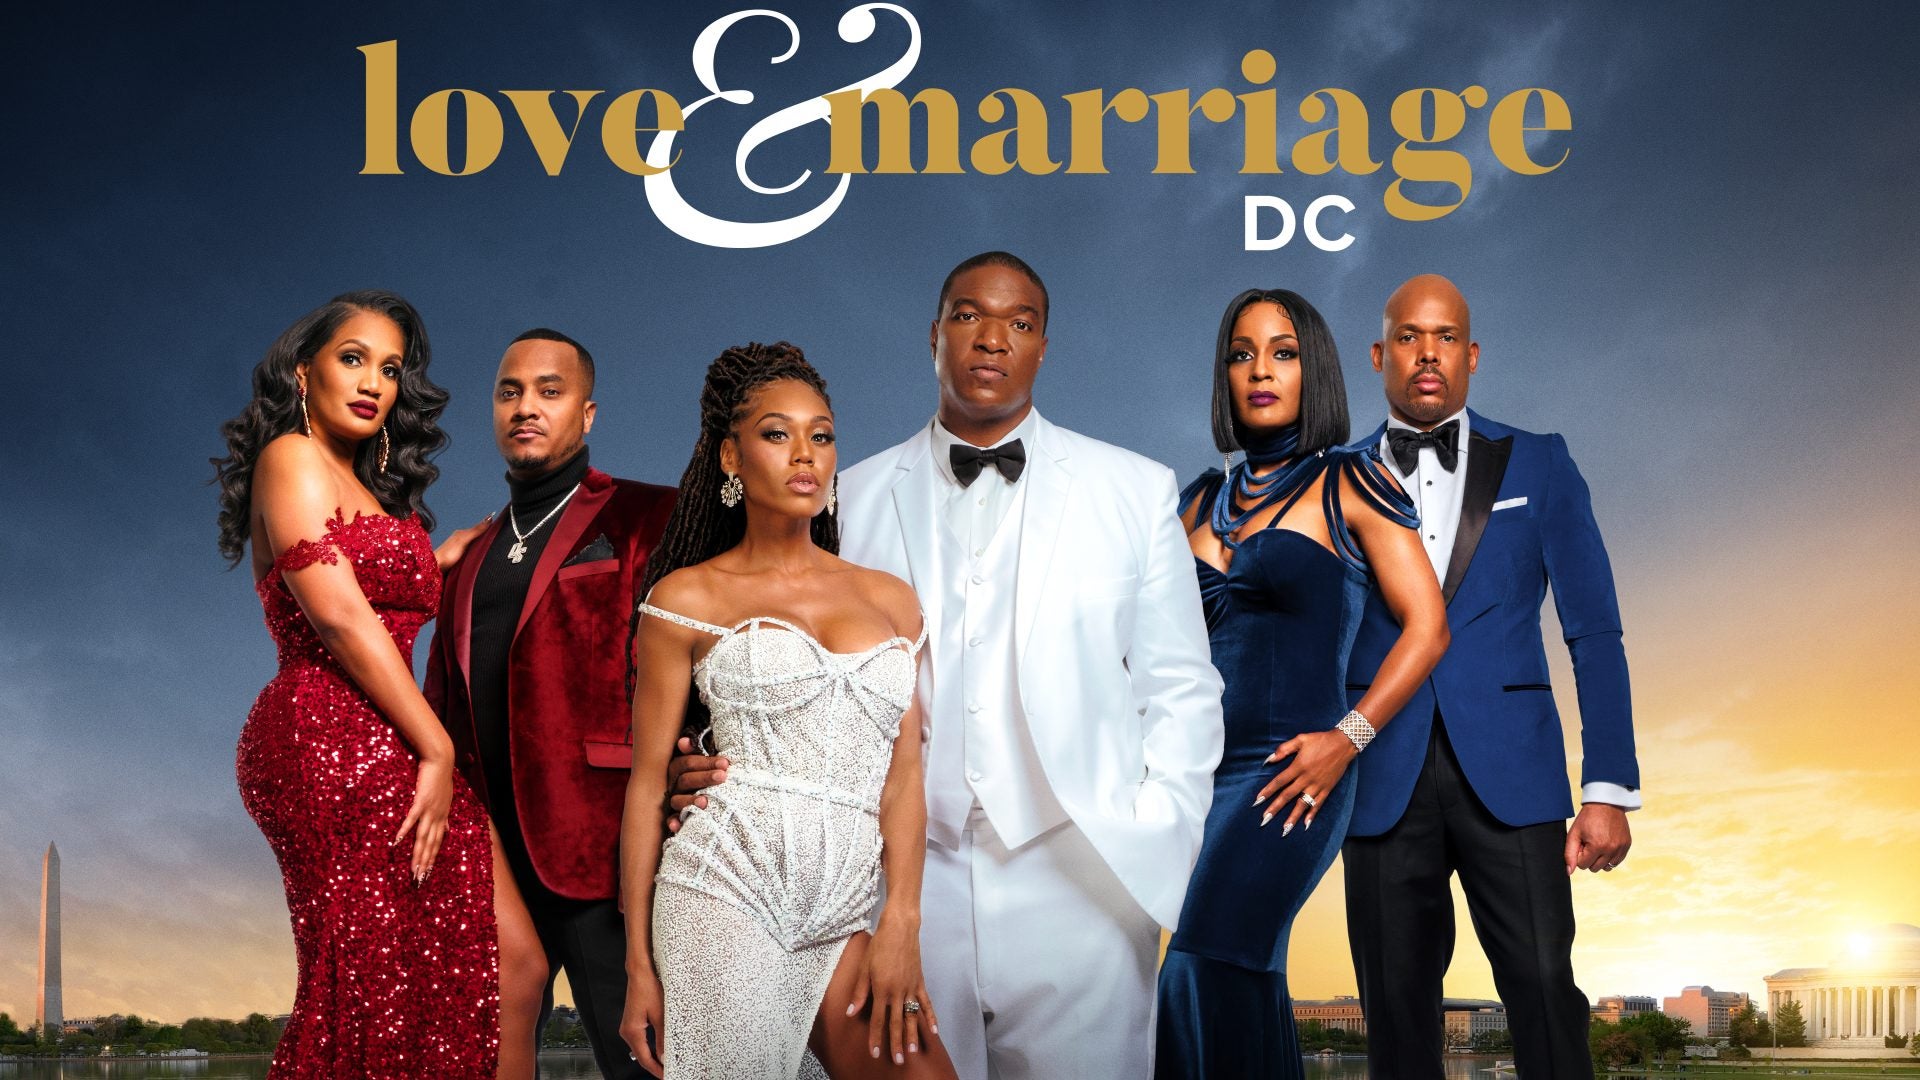 OWN Announces Debut Of Two New Programs: ‘The Nightcap With Carlos King,’ And ‘Love & Marriage: DC’